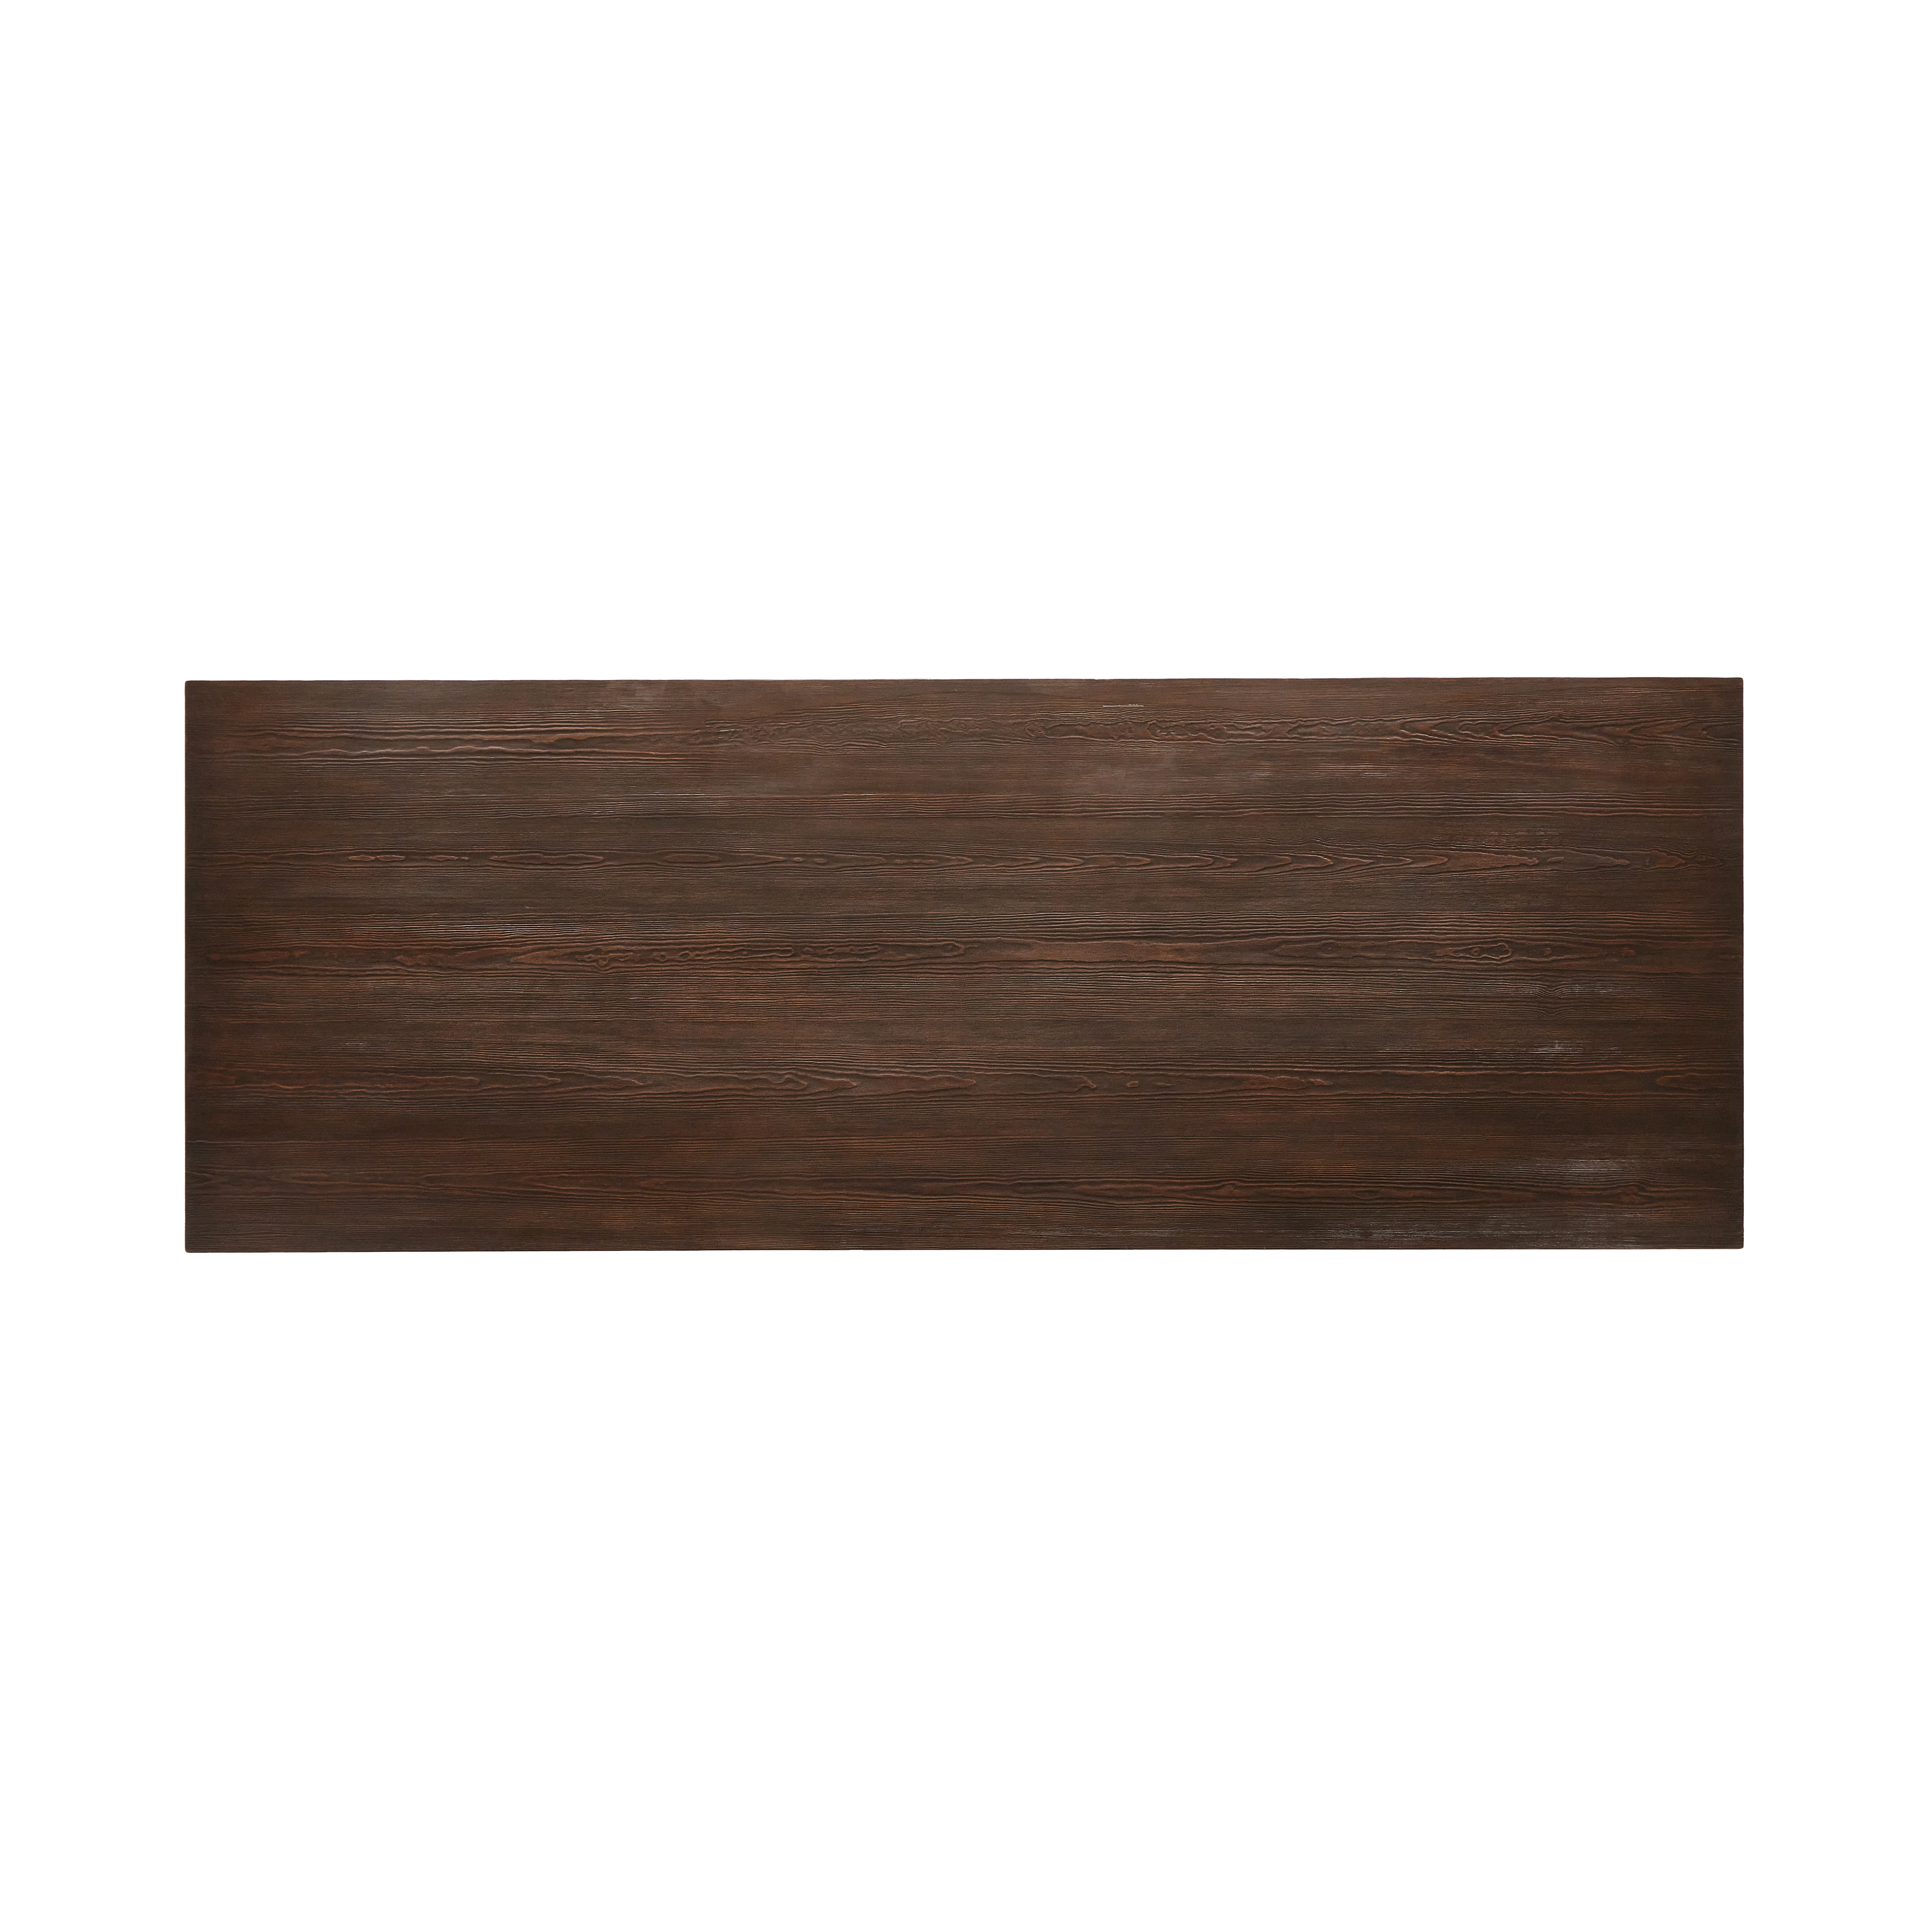 The Arch Dining Table-Medium Brown Fir - Image 5